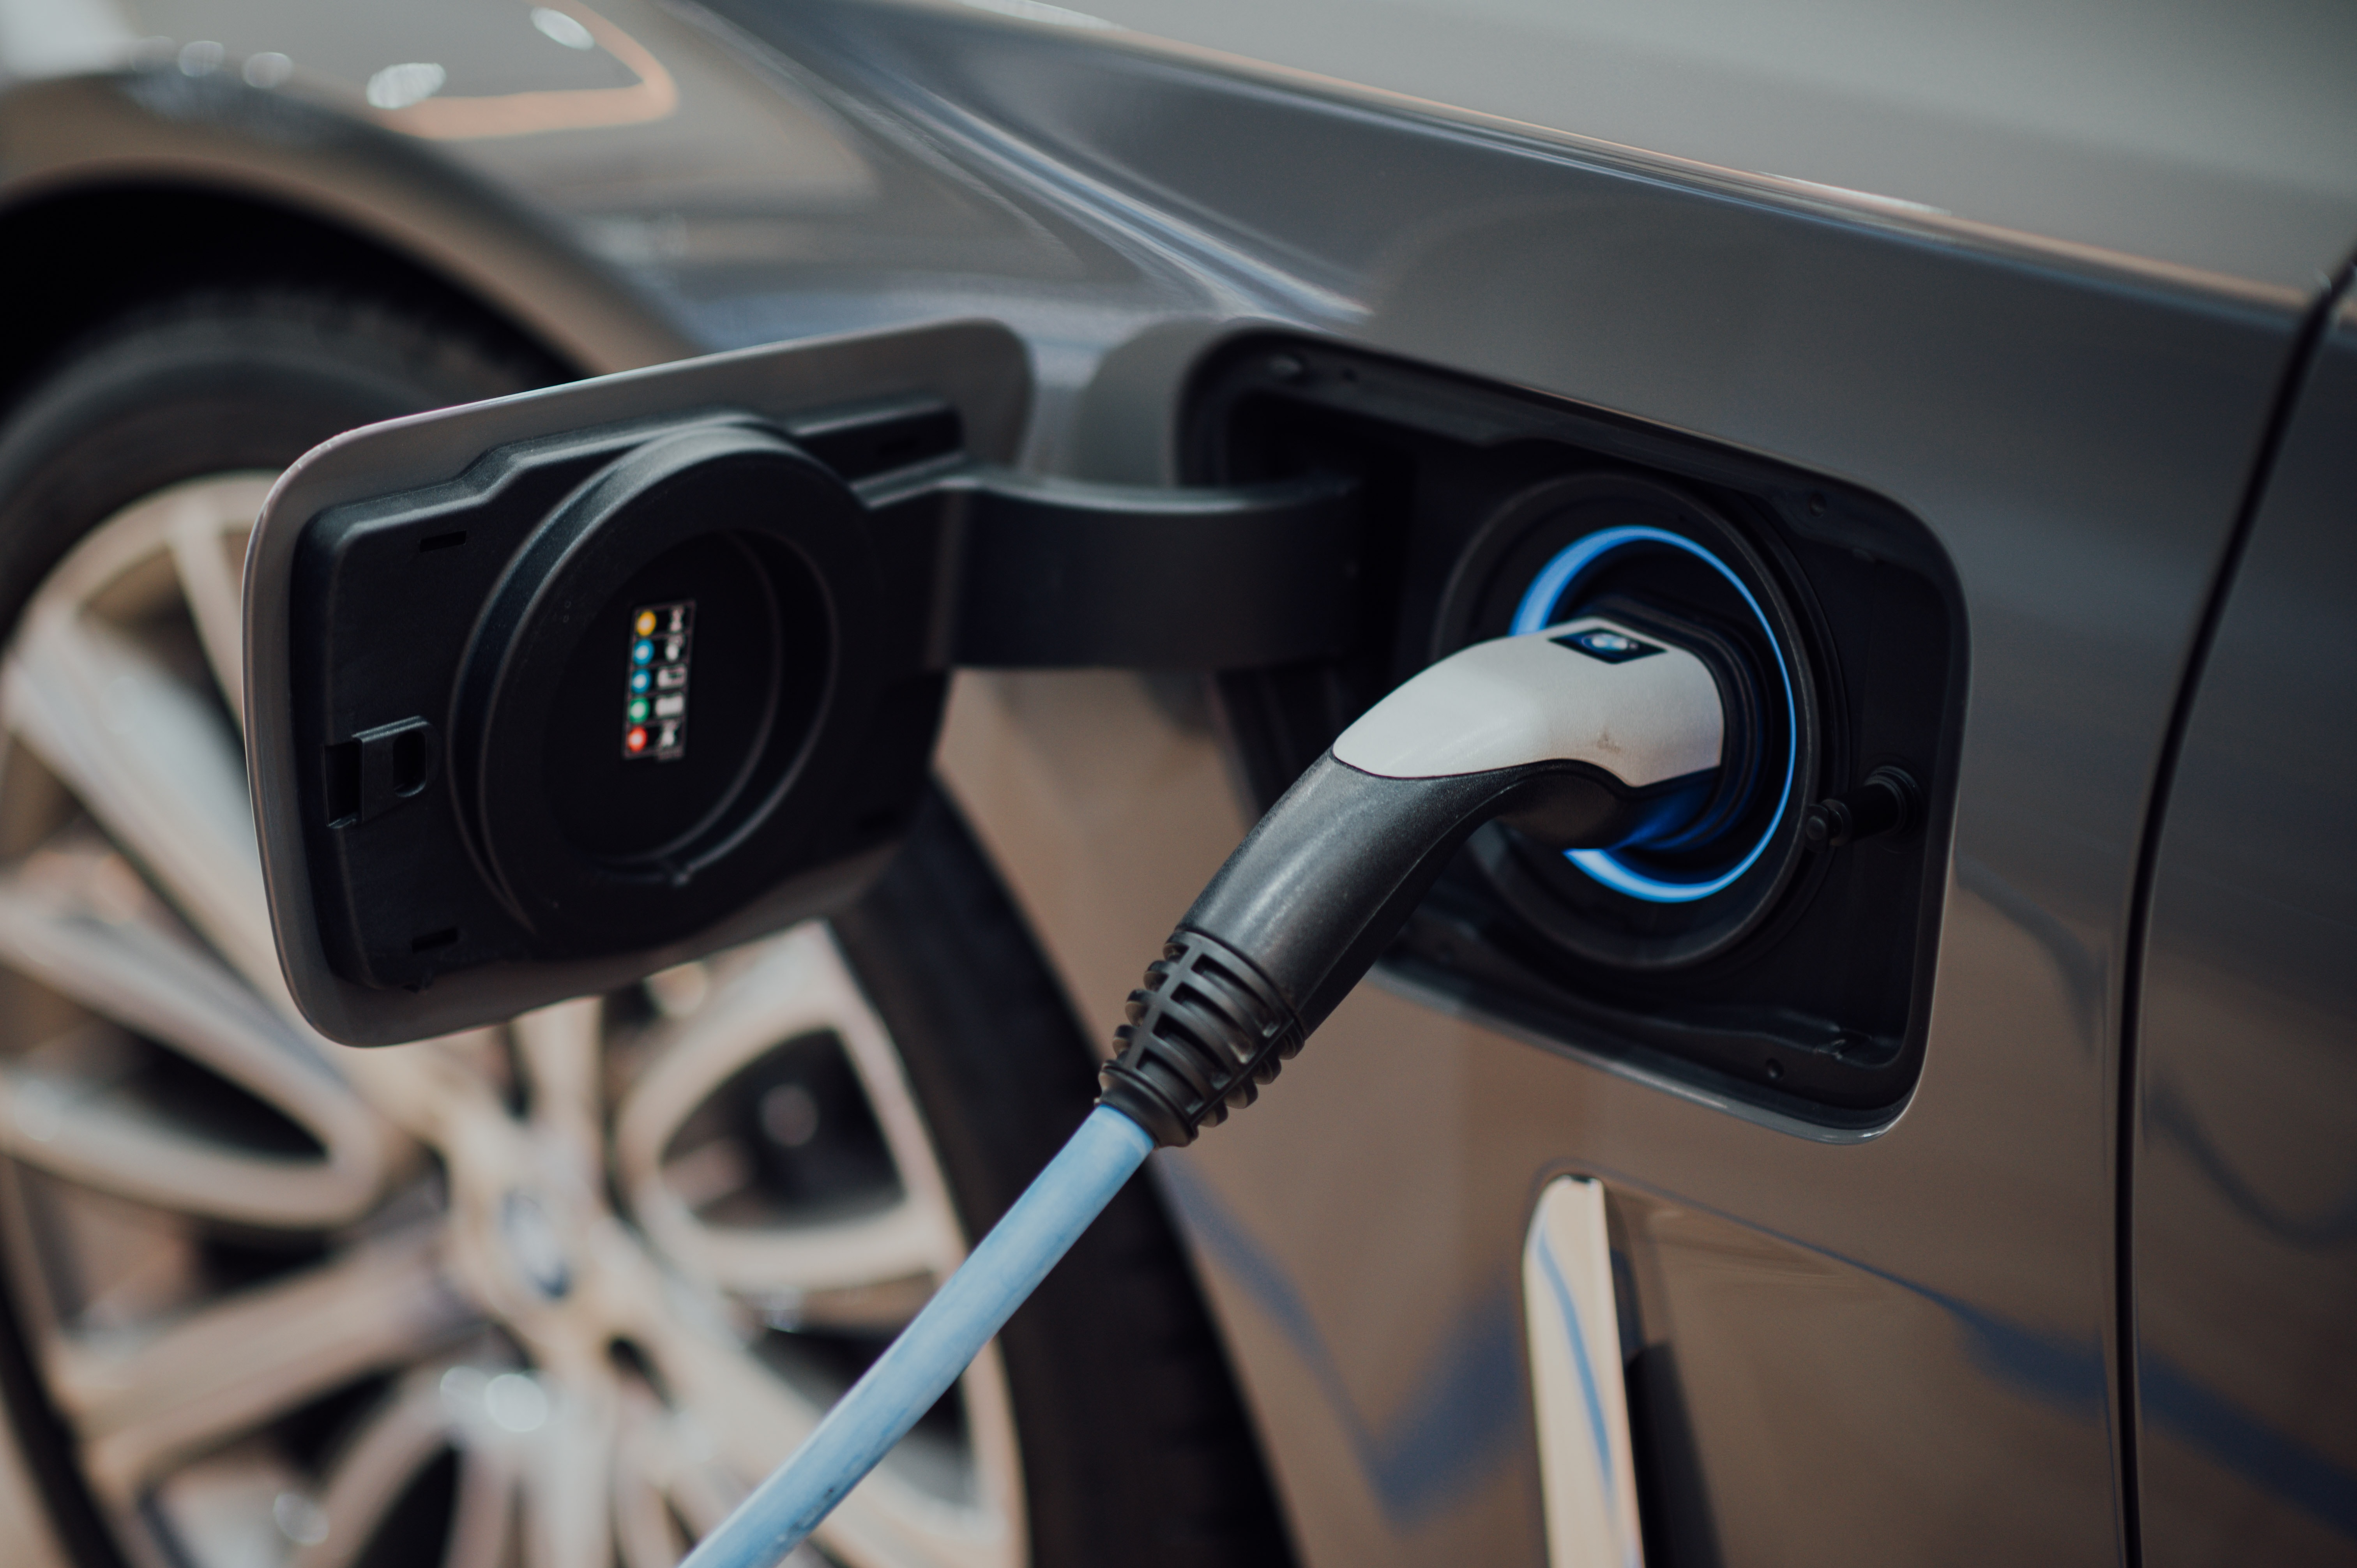 How To Unplug Electric Car Charger